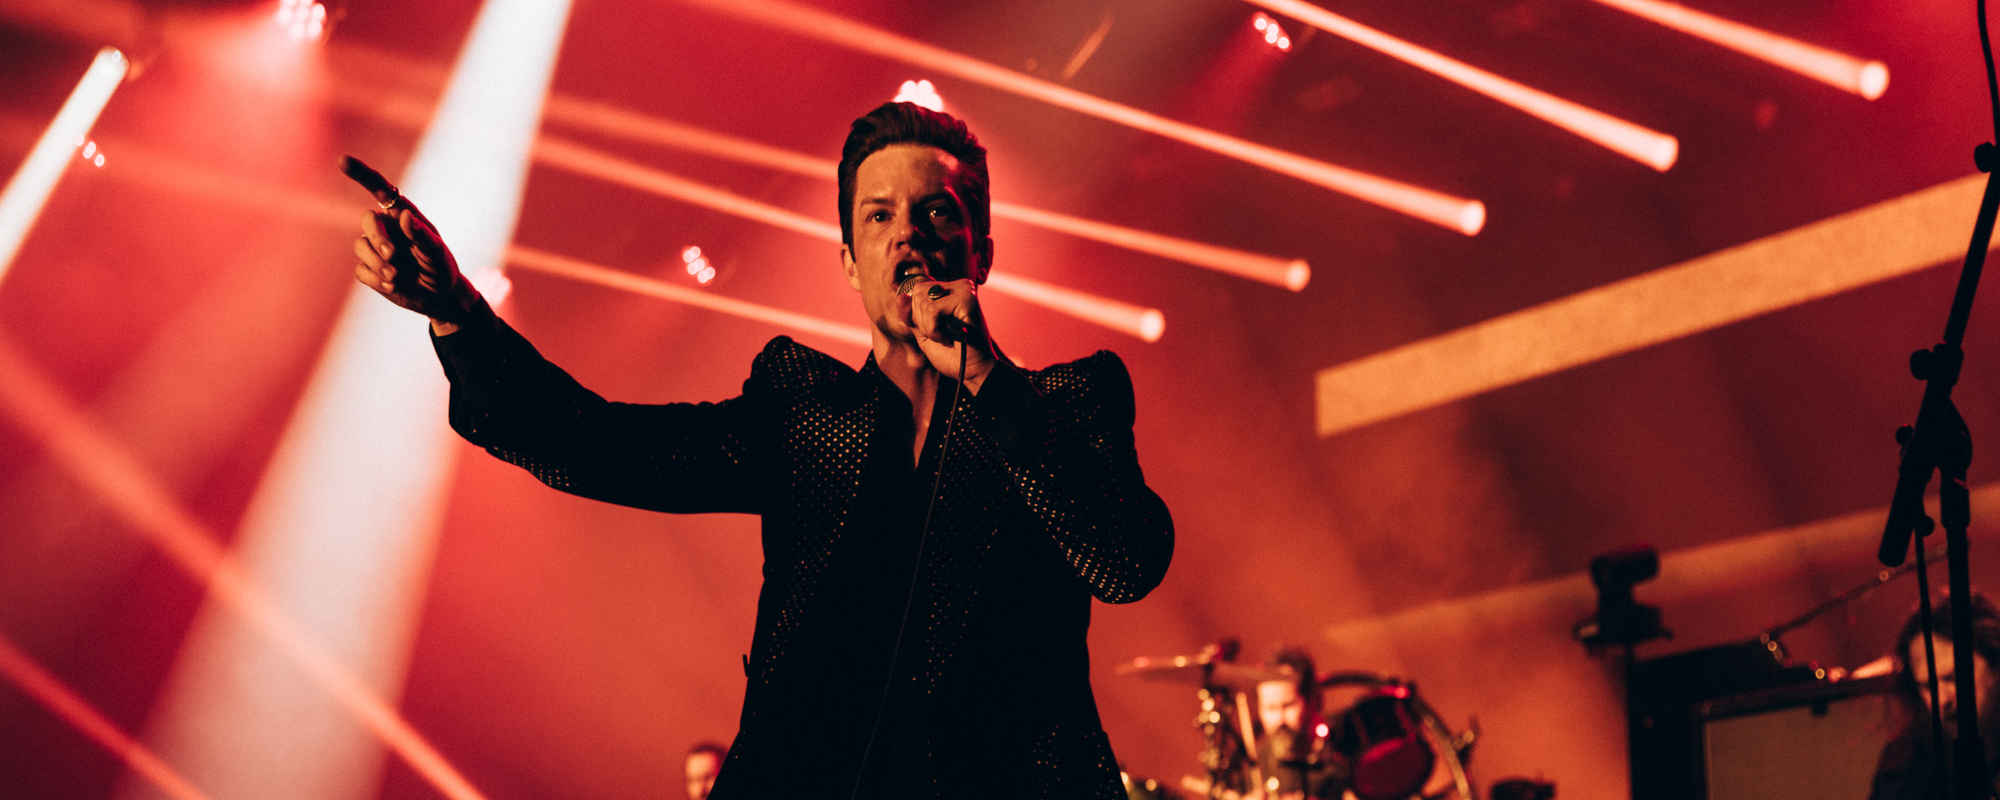 The Killers Announce Intimate Show at First Avenue Prior to Their Gig at SummerFest 2023